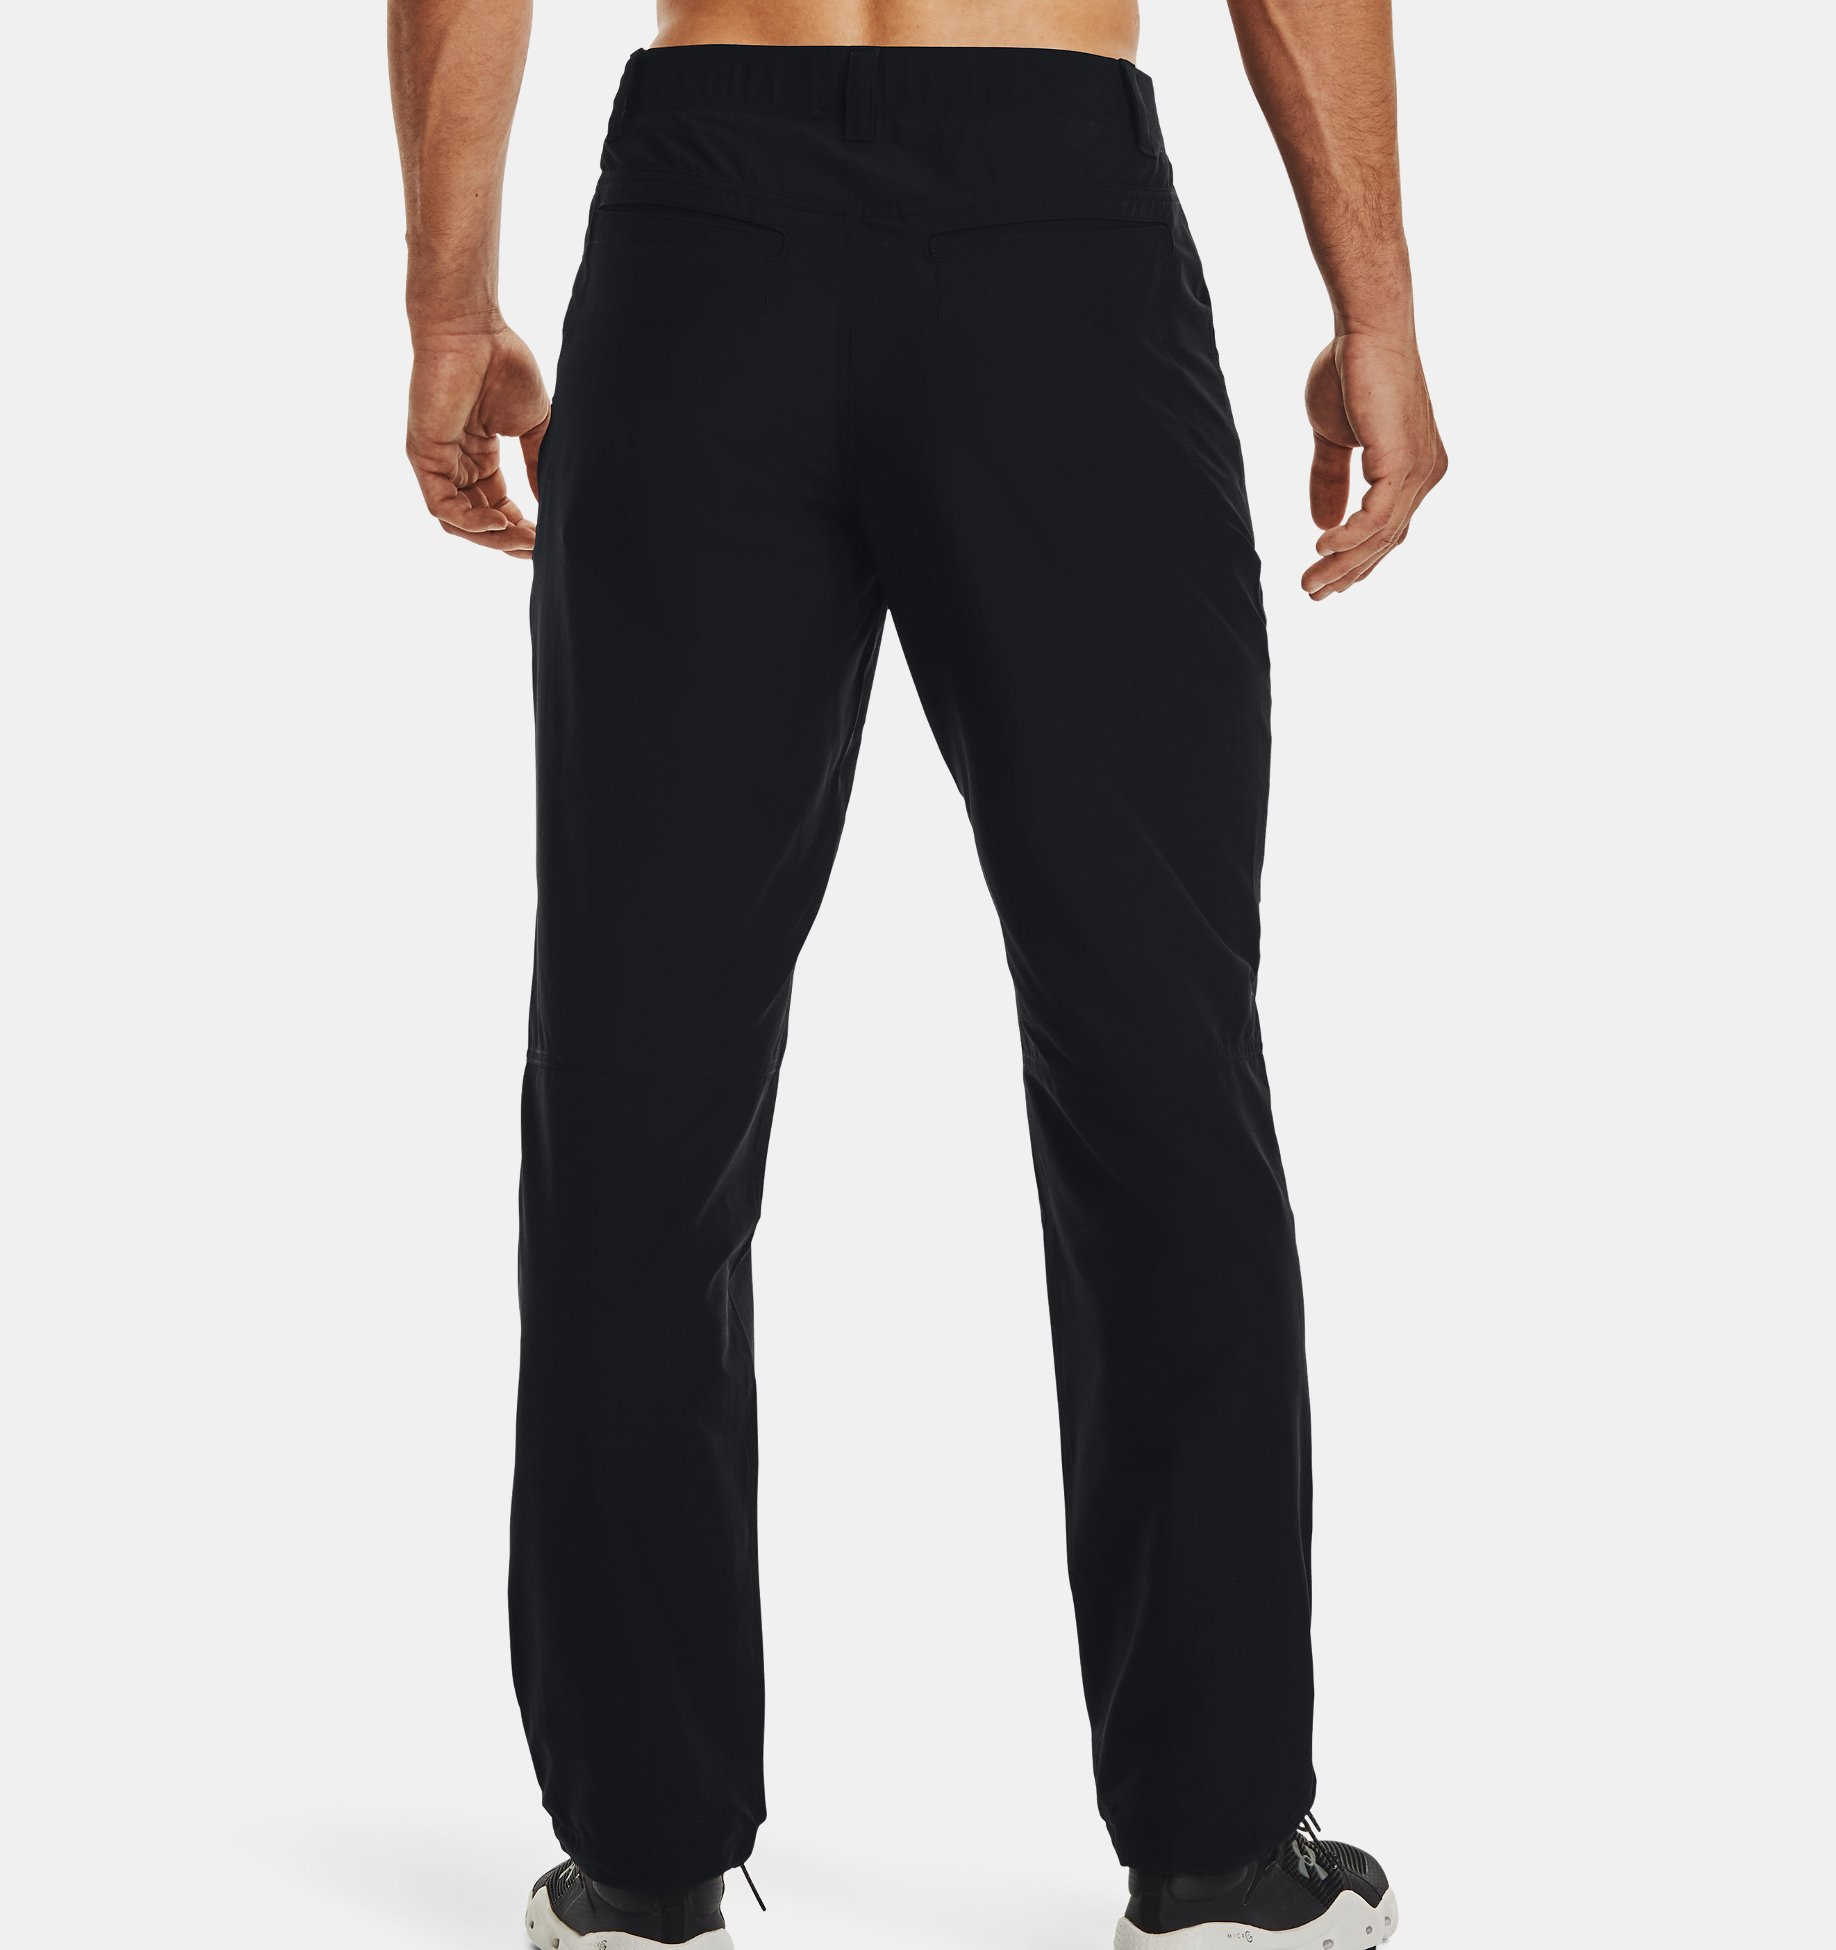 NWT MSRP $90 Details about   Under Armour Men's Canyon Cargo Fish Pants 1352692-299 Size 40X34 